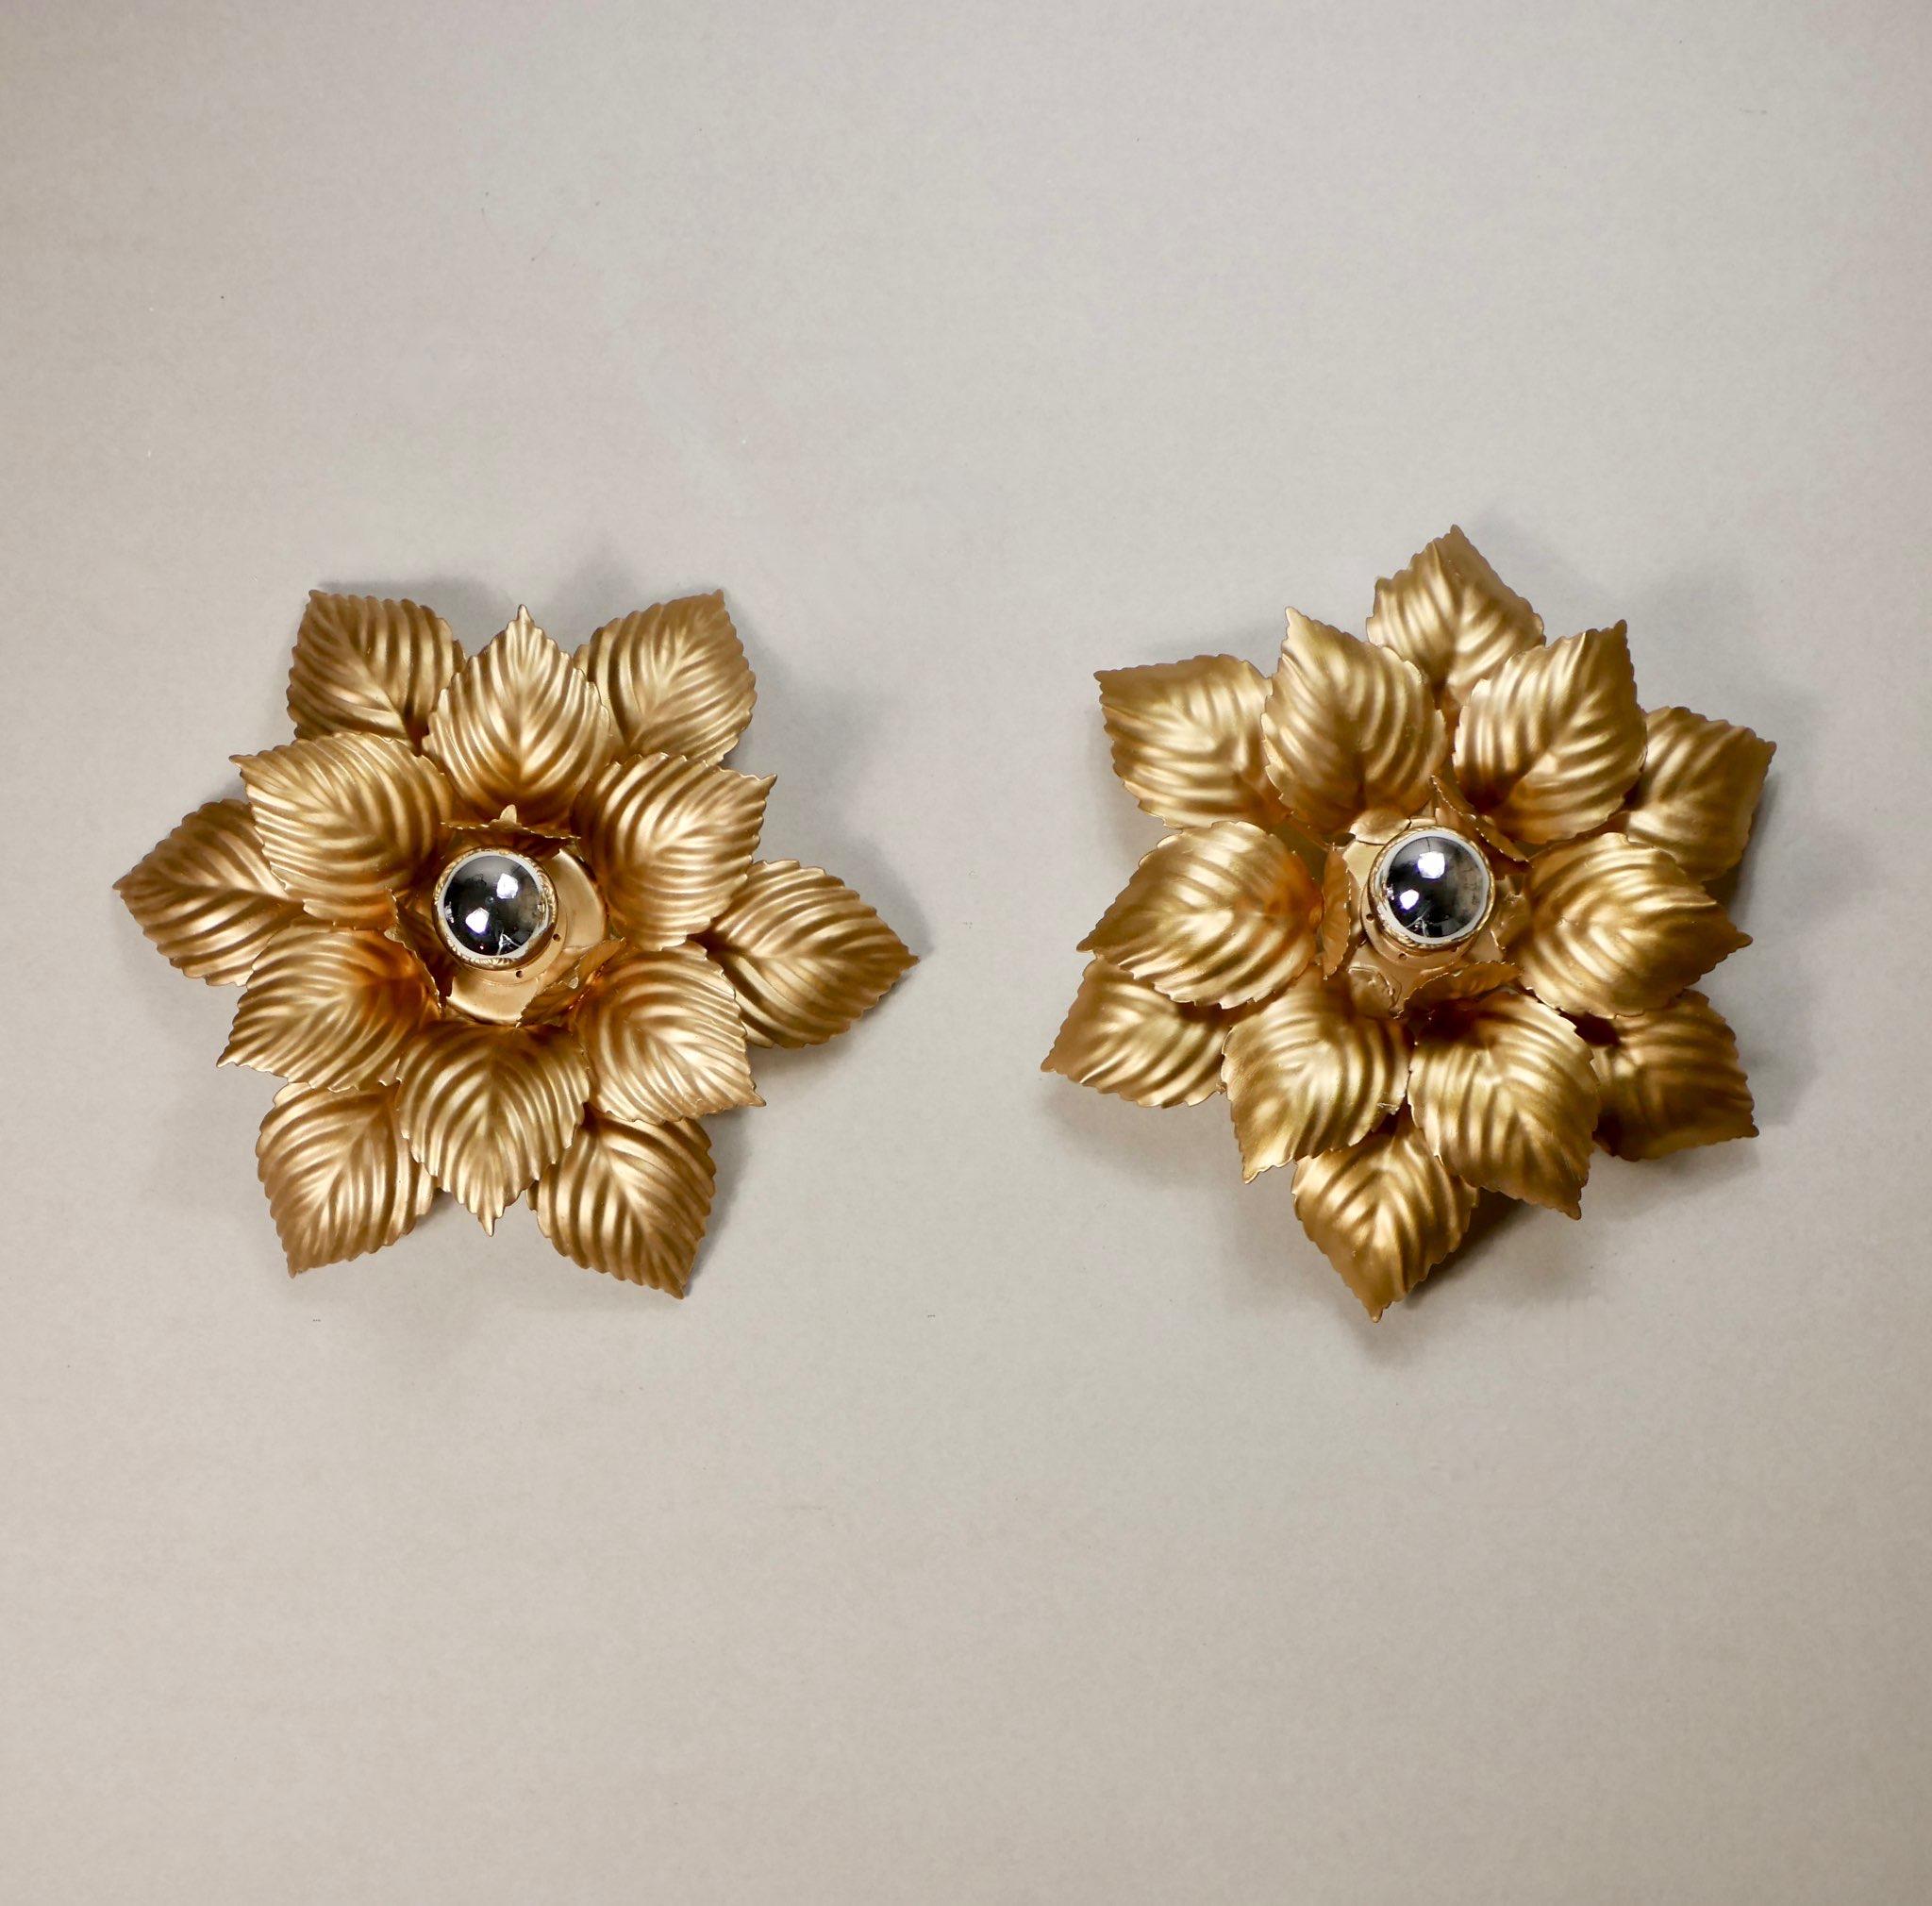 Stunning pair of gilded floral sconces made by Masca in the 1980s in Italy.
Slightly different.
Dimensions : diameter 40cm, depth 14cm